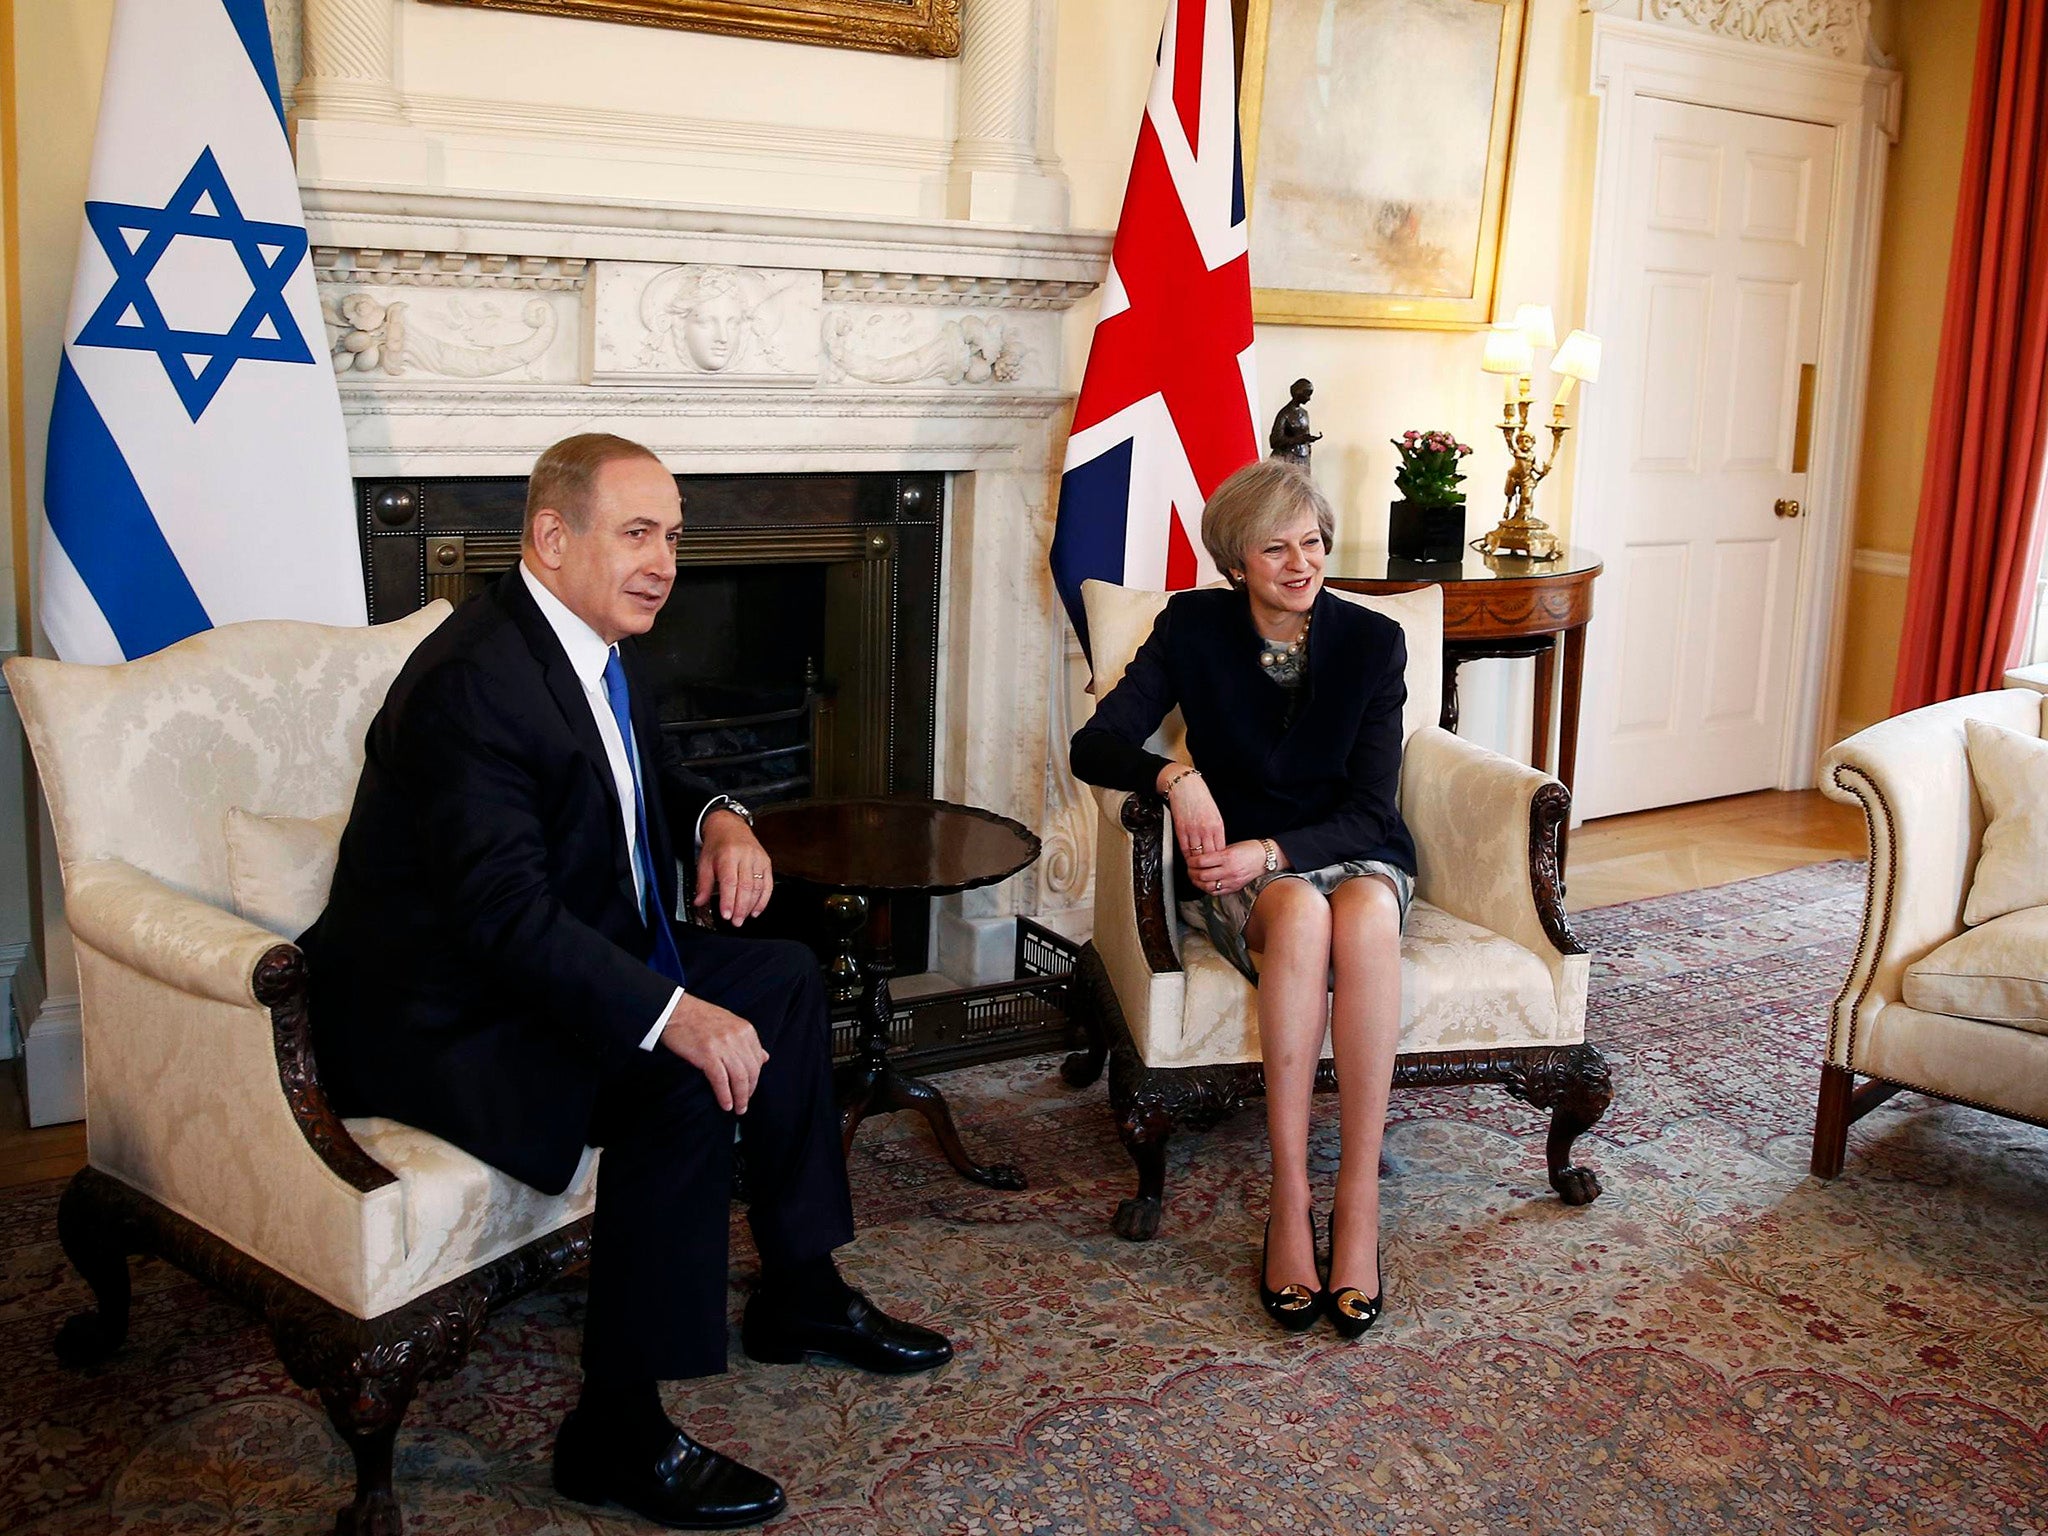 The Israeli Prime Minister and Theresa May at a meeting in London